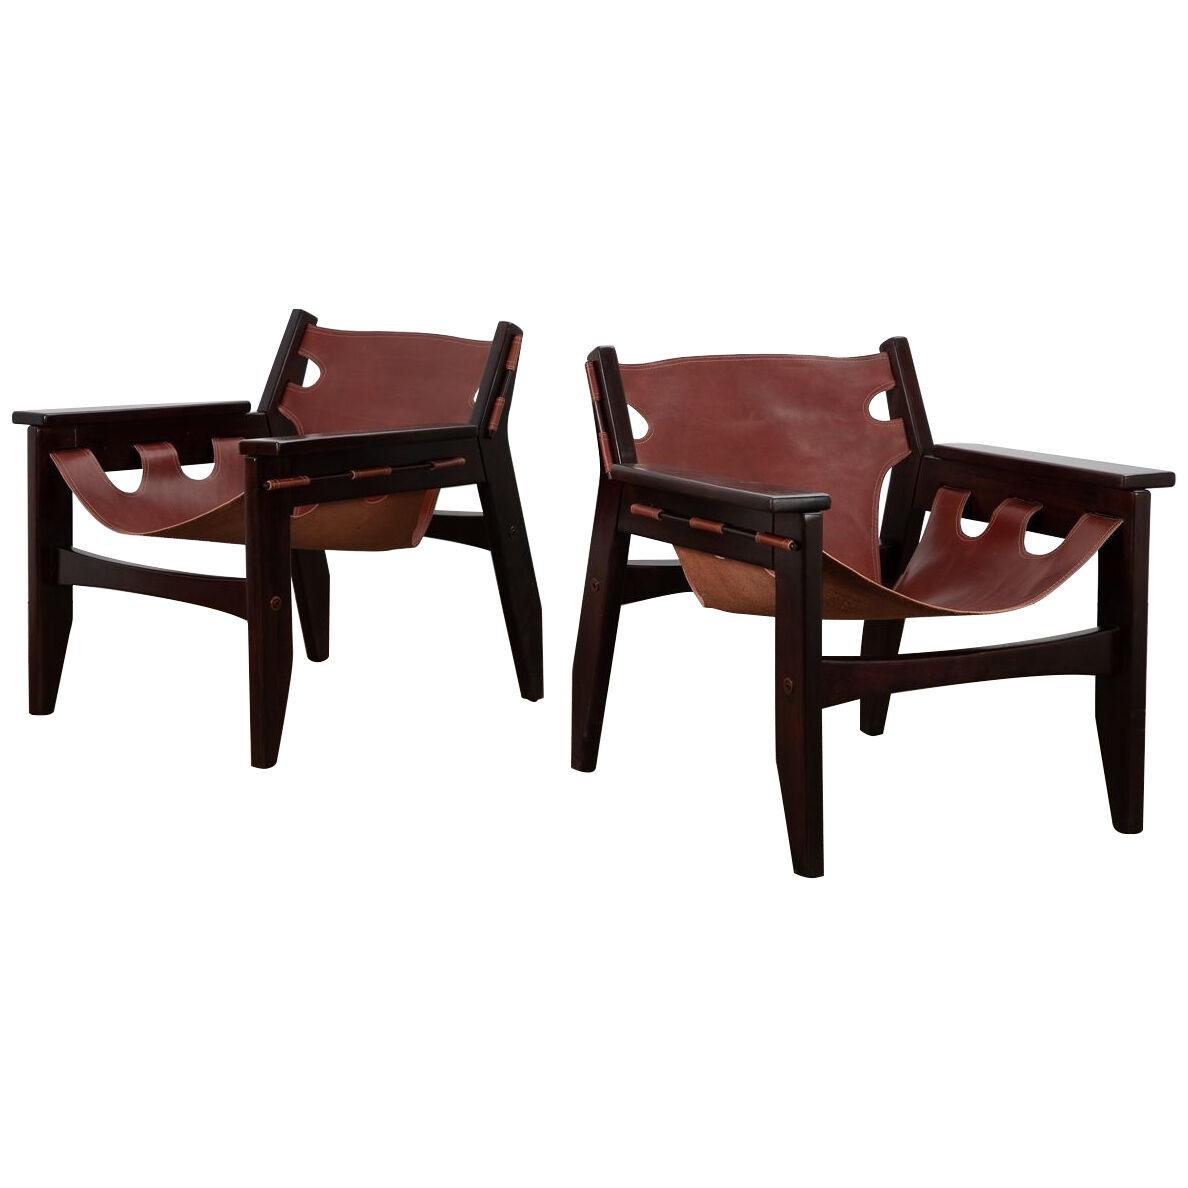 Sergio Rodrigues Kilin Chairs in Cognac Leather